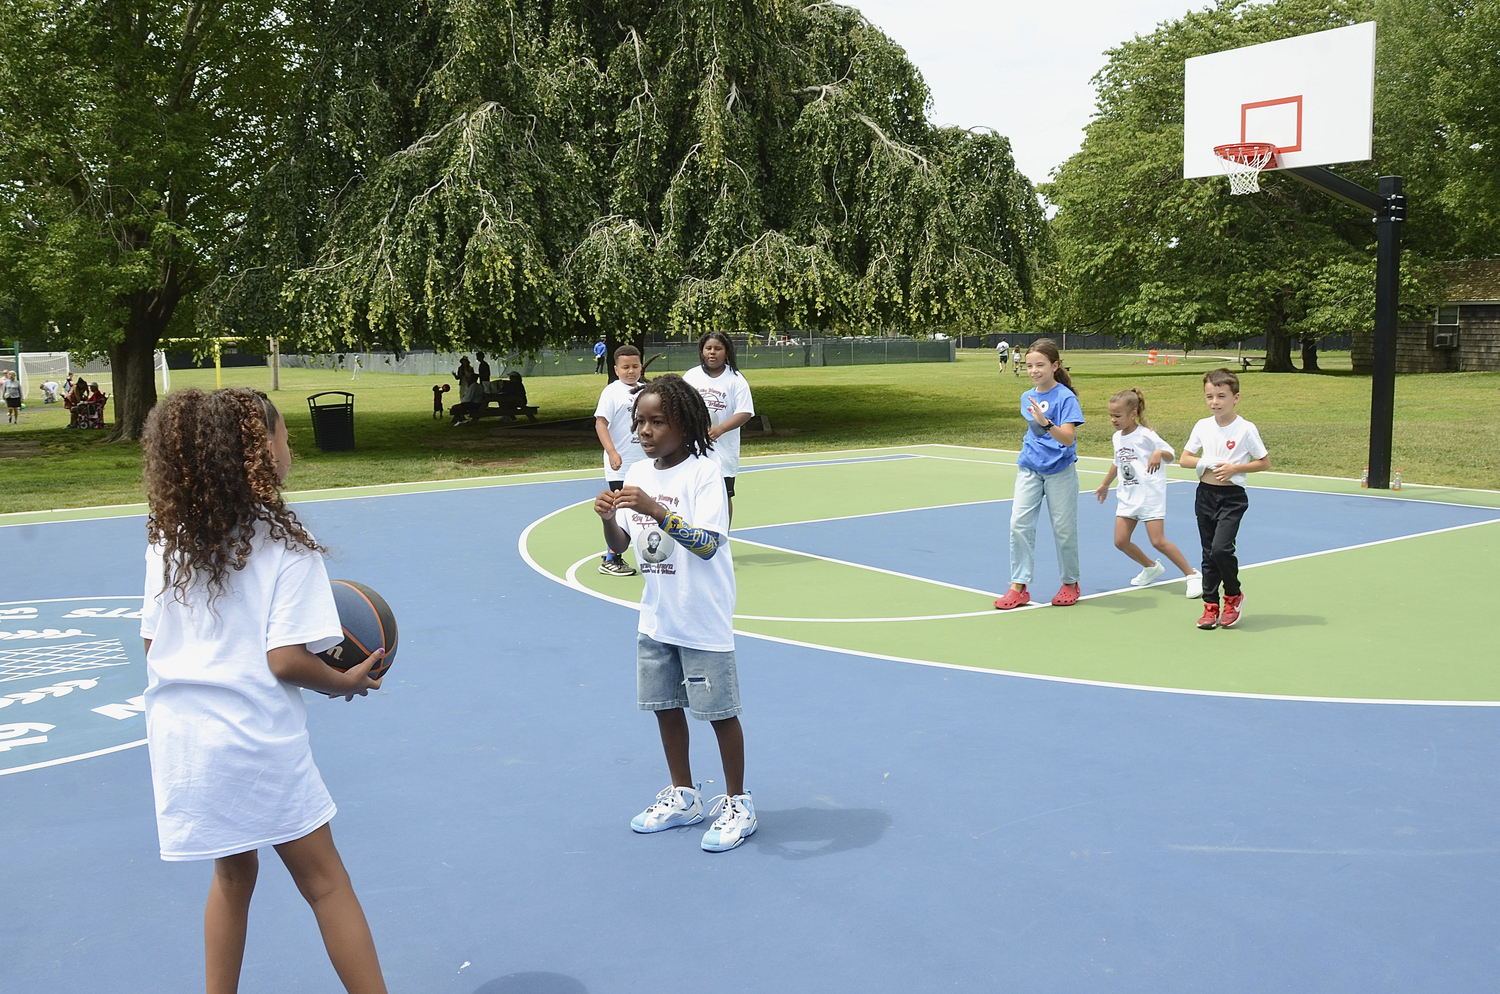 The new Roy Lee Mabery Memorial Courts have already drawn people of all ages. KYRIL BROMLEY